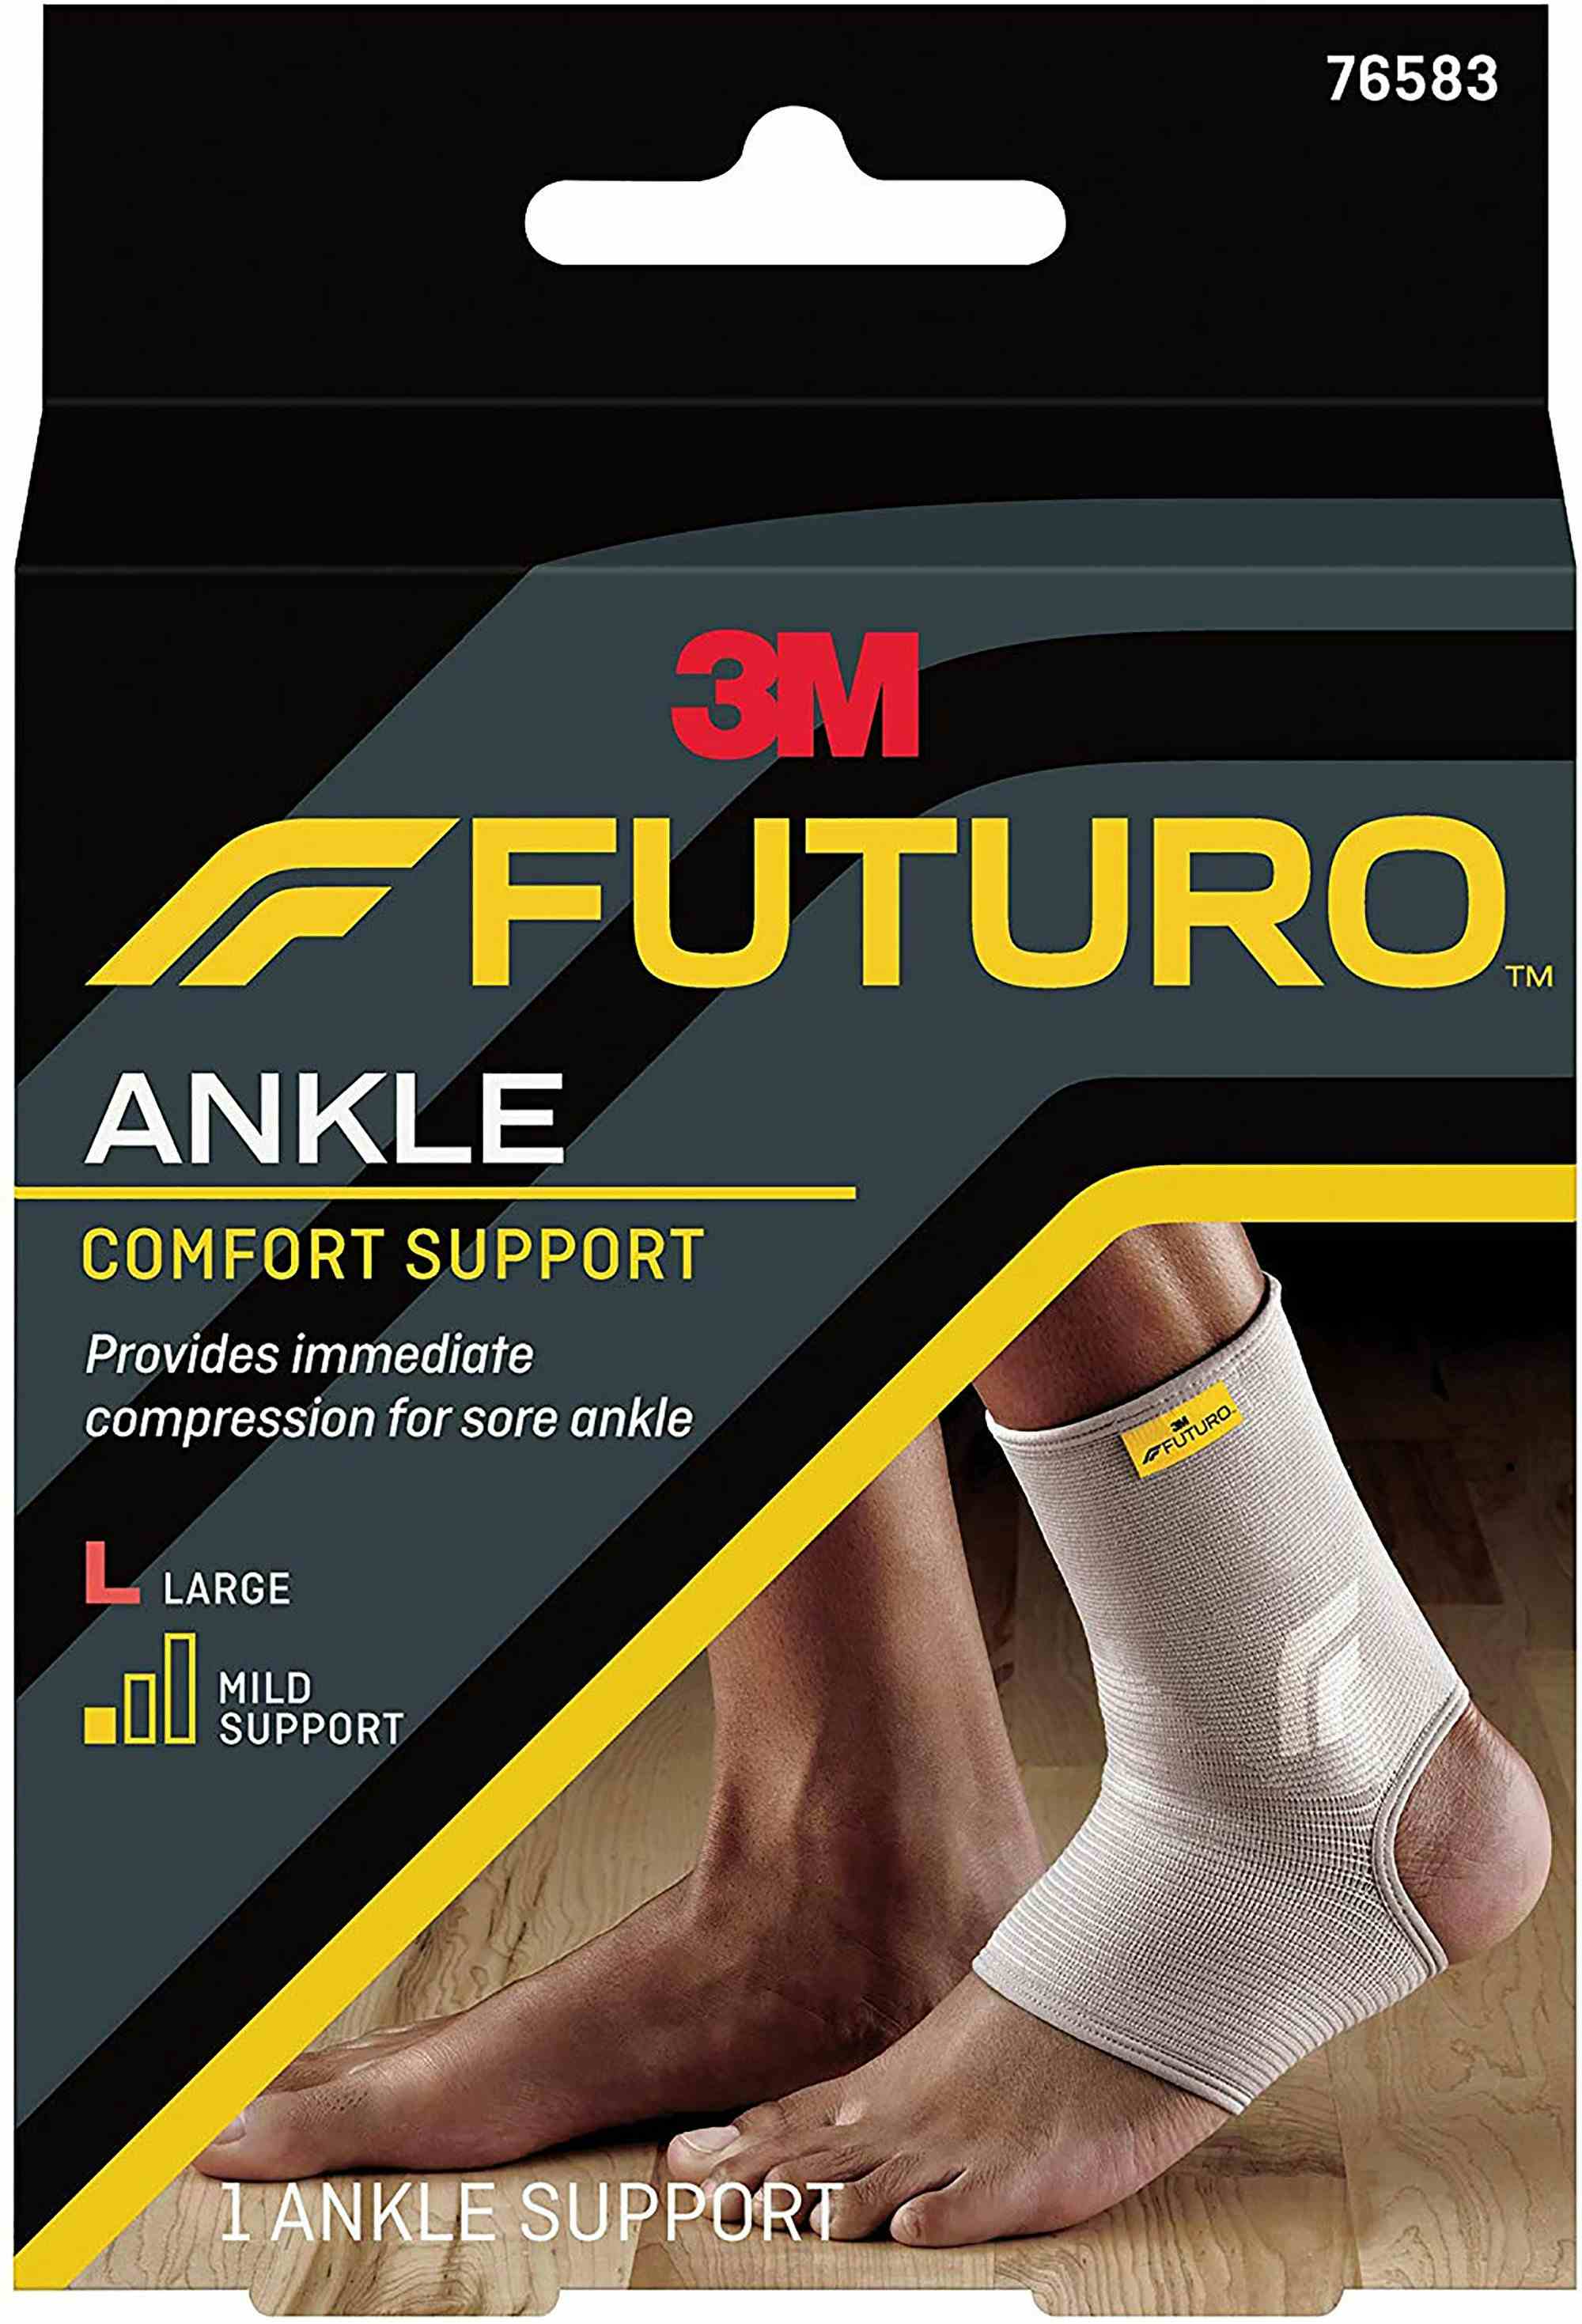 3M Futuro Ankle Comfort Support, 76583ENR, Large - Box of 3